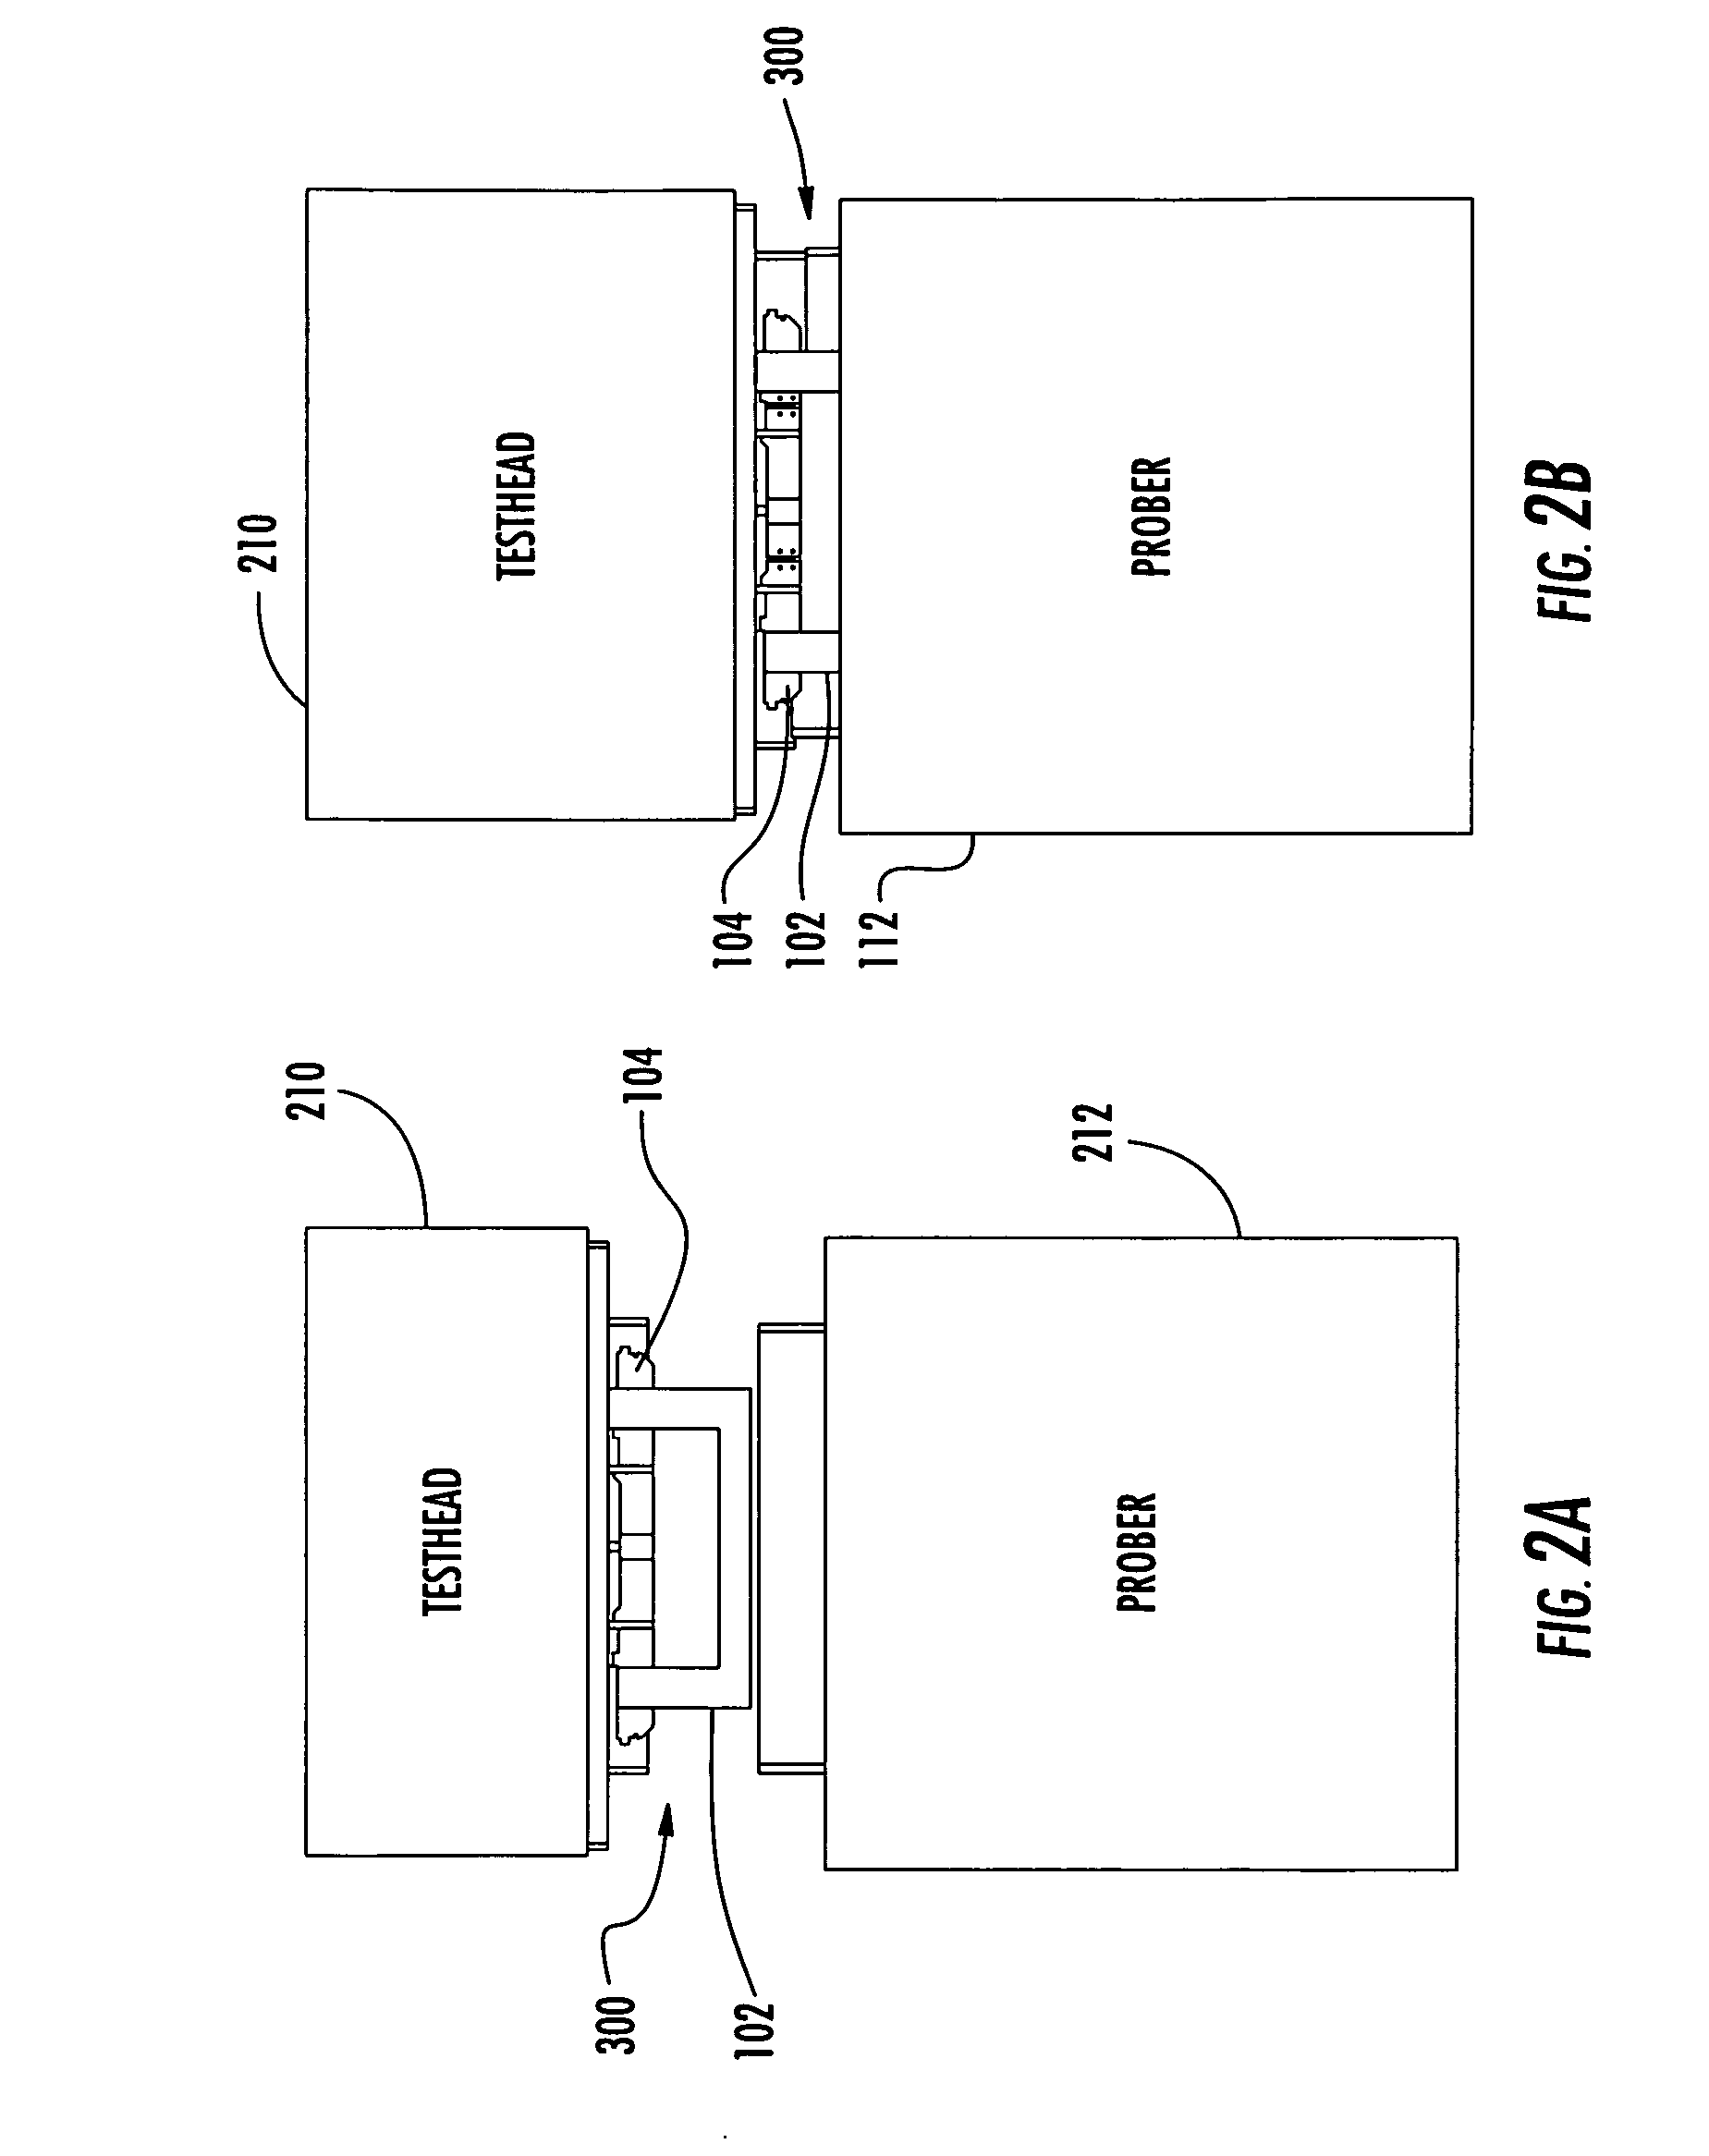 Automatic testing equipment instrument card and probe cabling system and apparatus